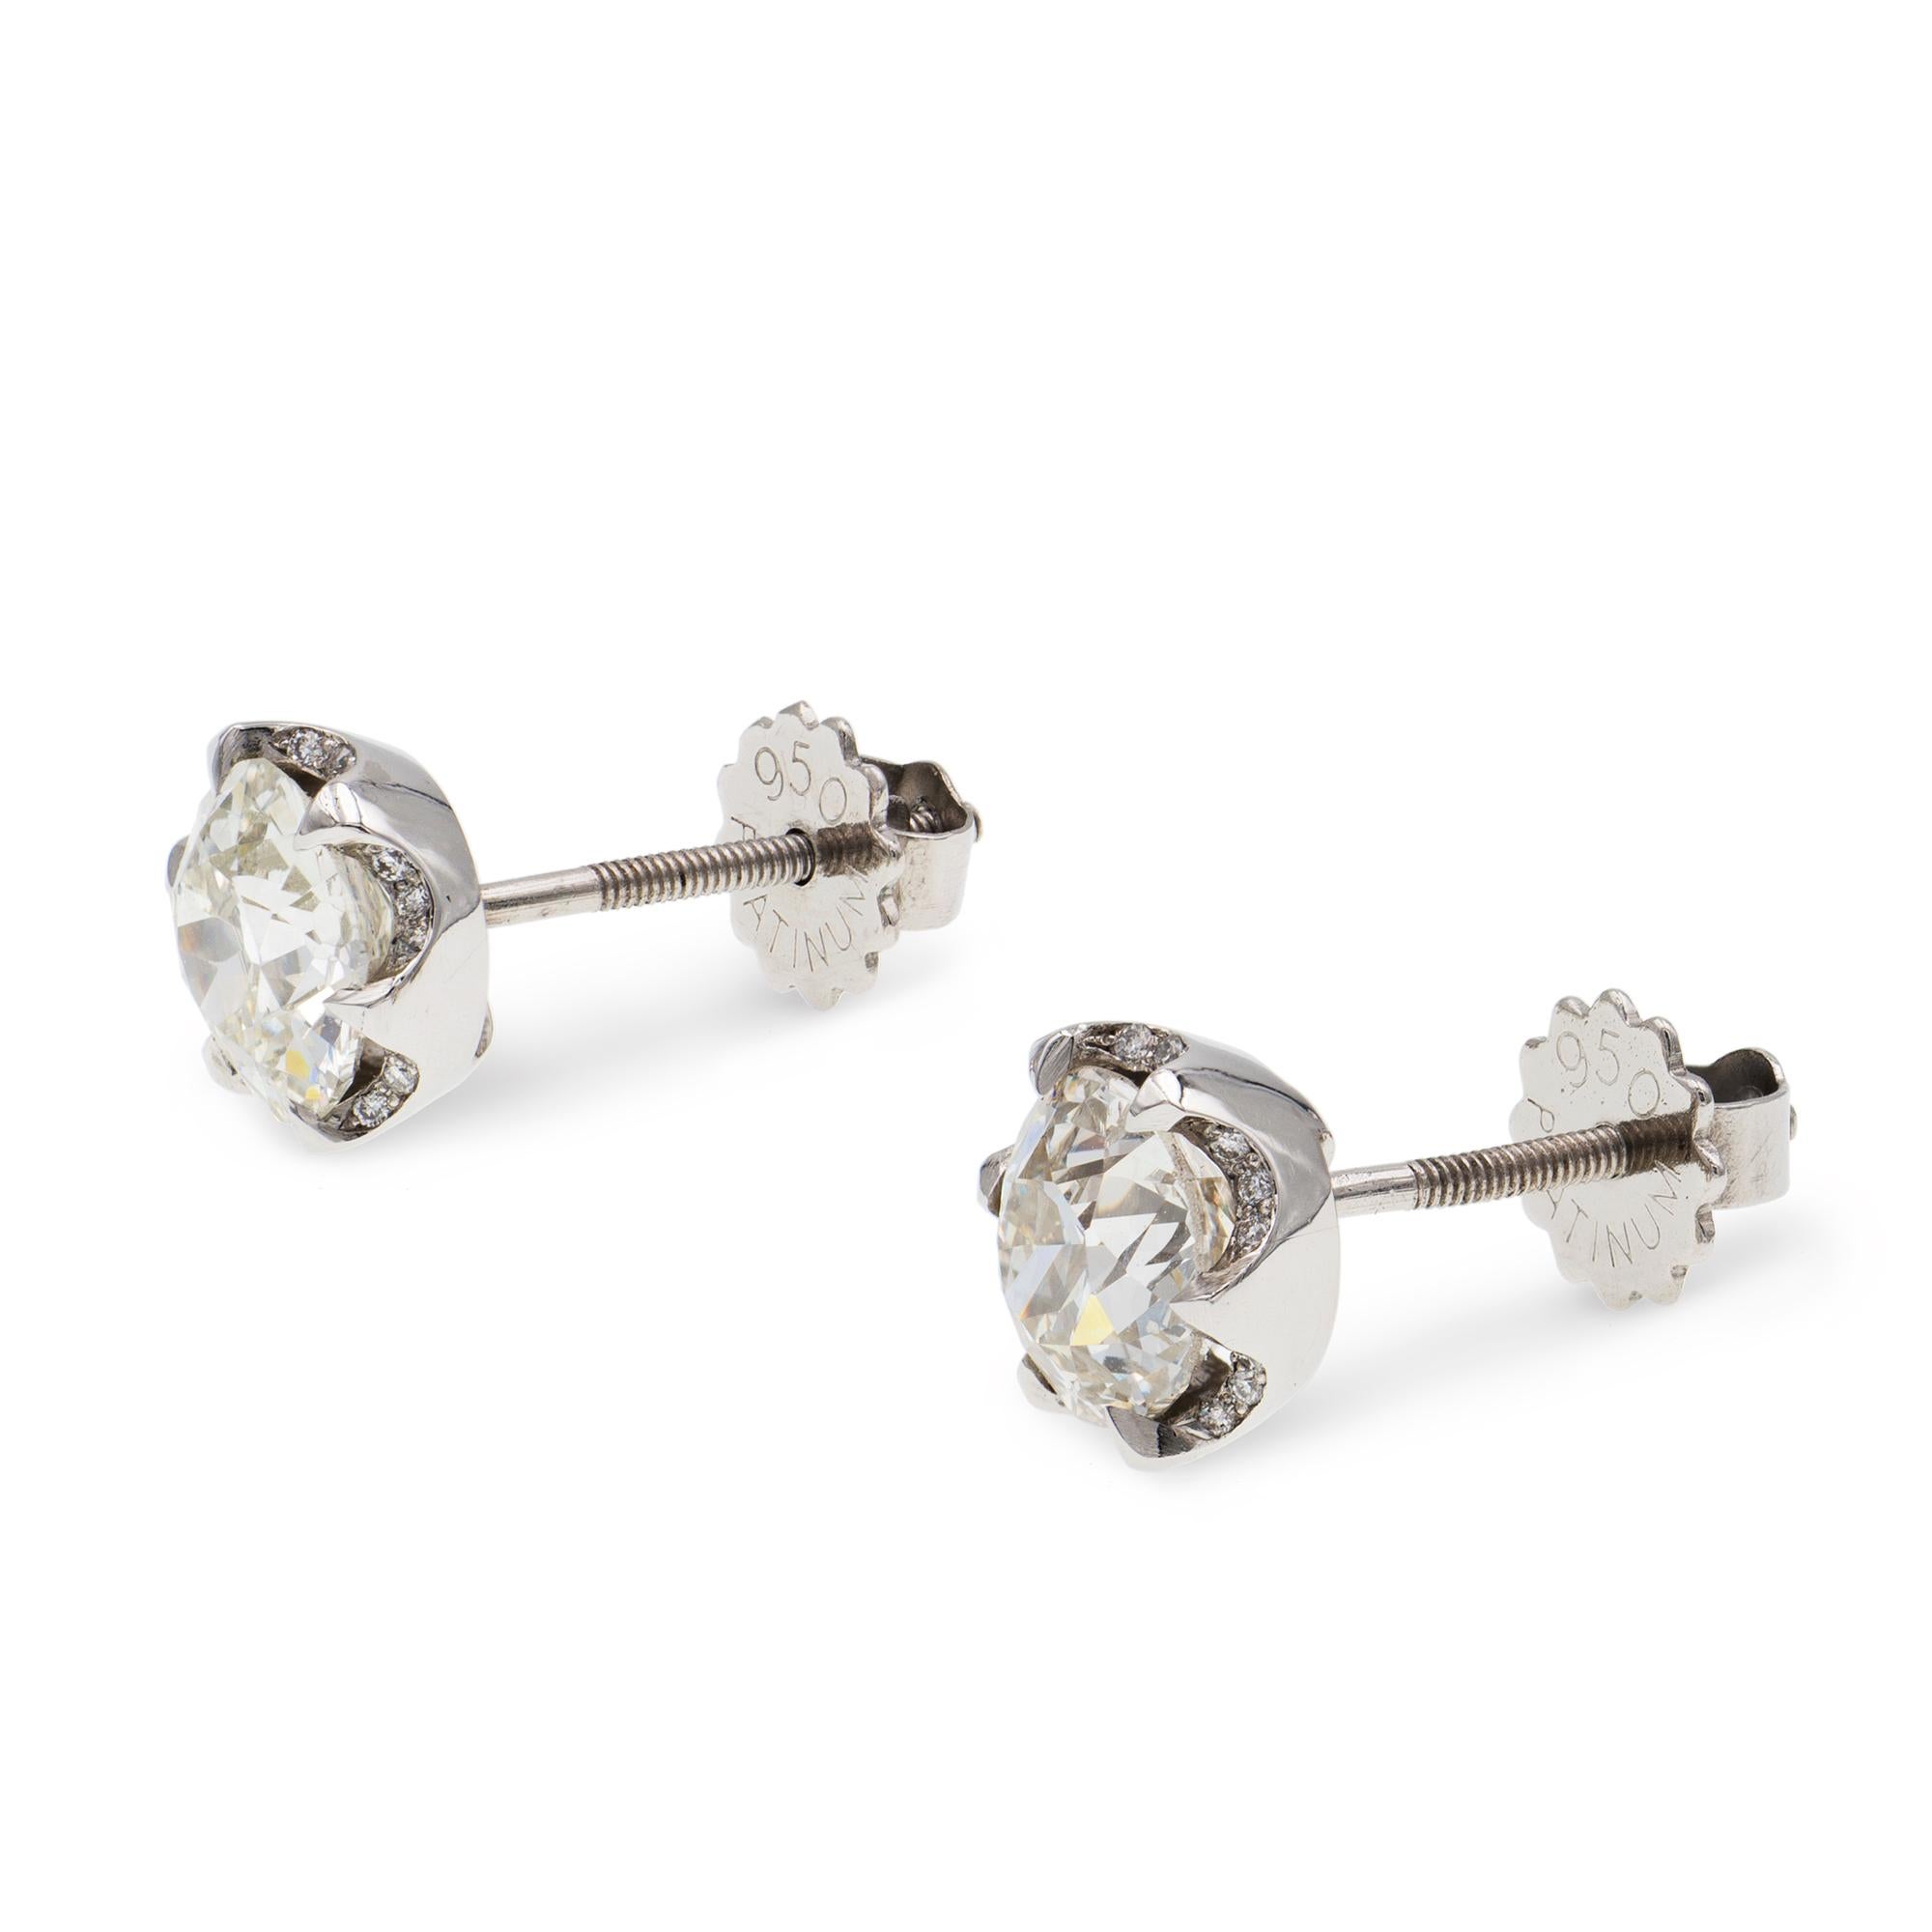 A pair of old-cut diamond stud earrings, the one earring set with a 1.23ct old-cut diamond, of J colour VS2 clarity, the other set with an old cut diamond weighing 1.11 carats, J colour VVS2 clarity, accompanied by HRD reports, mounted in a claw